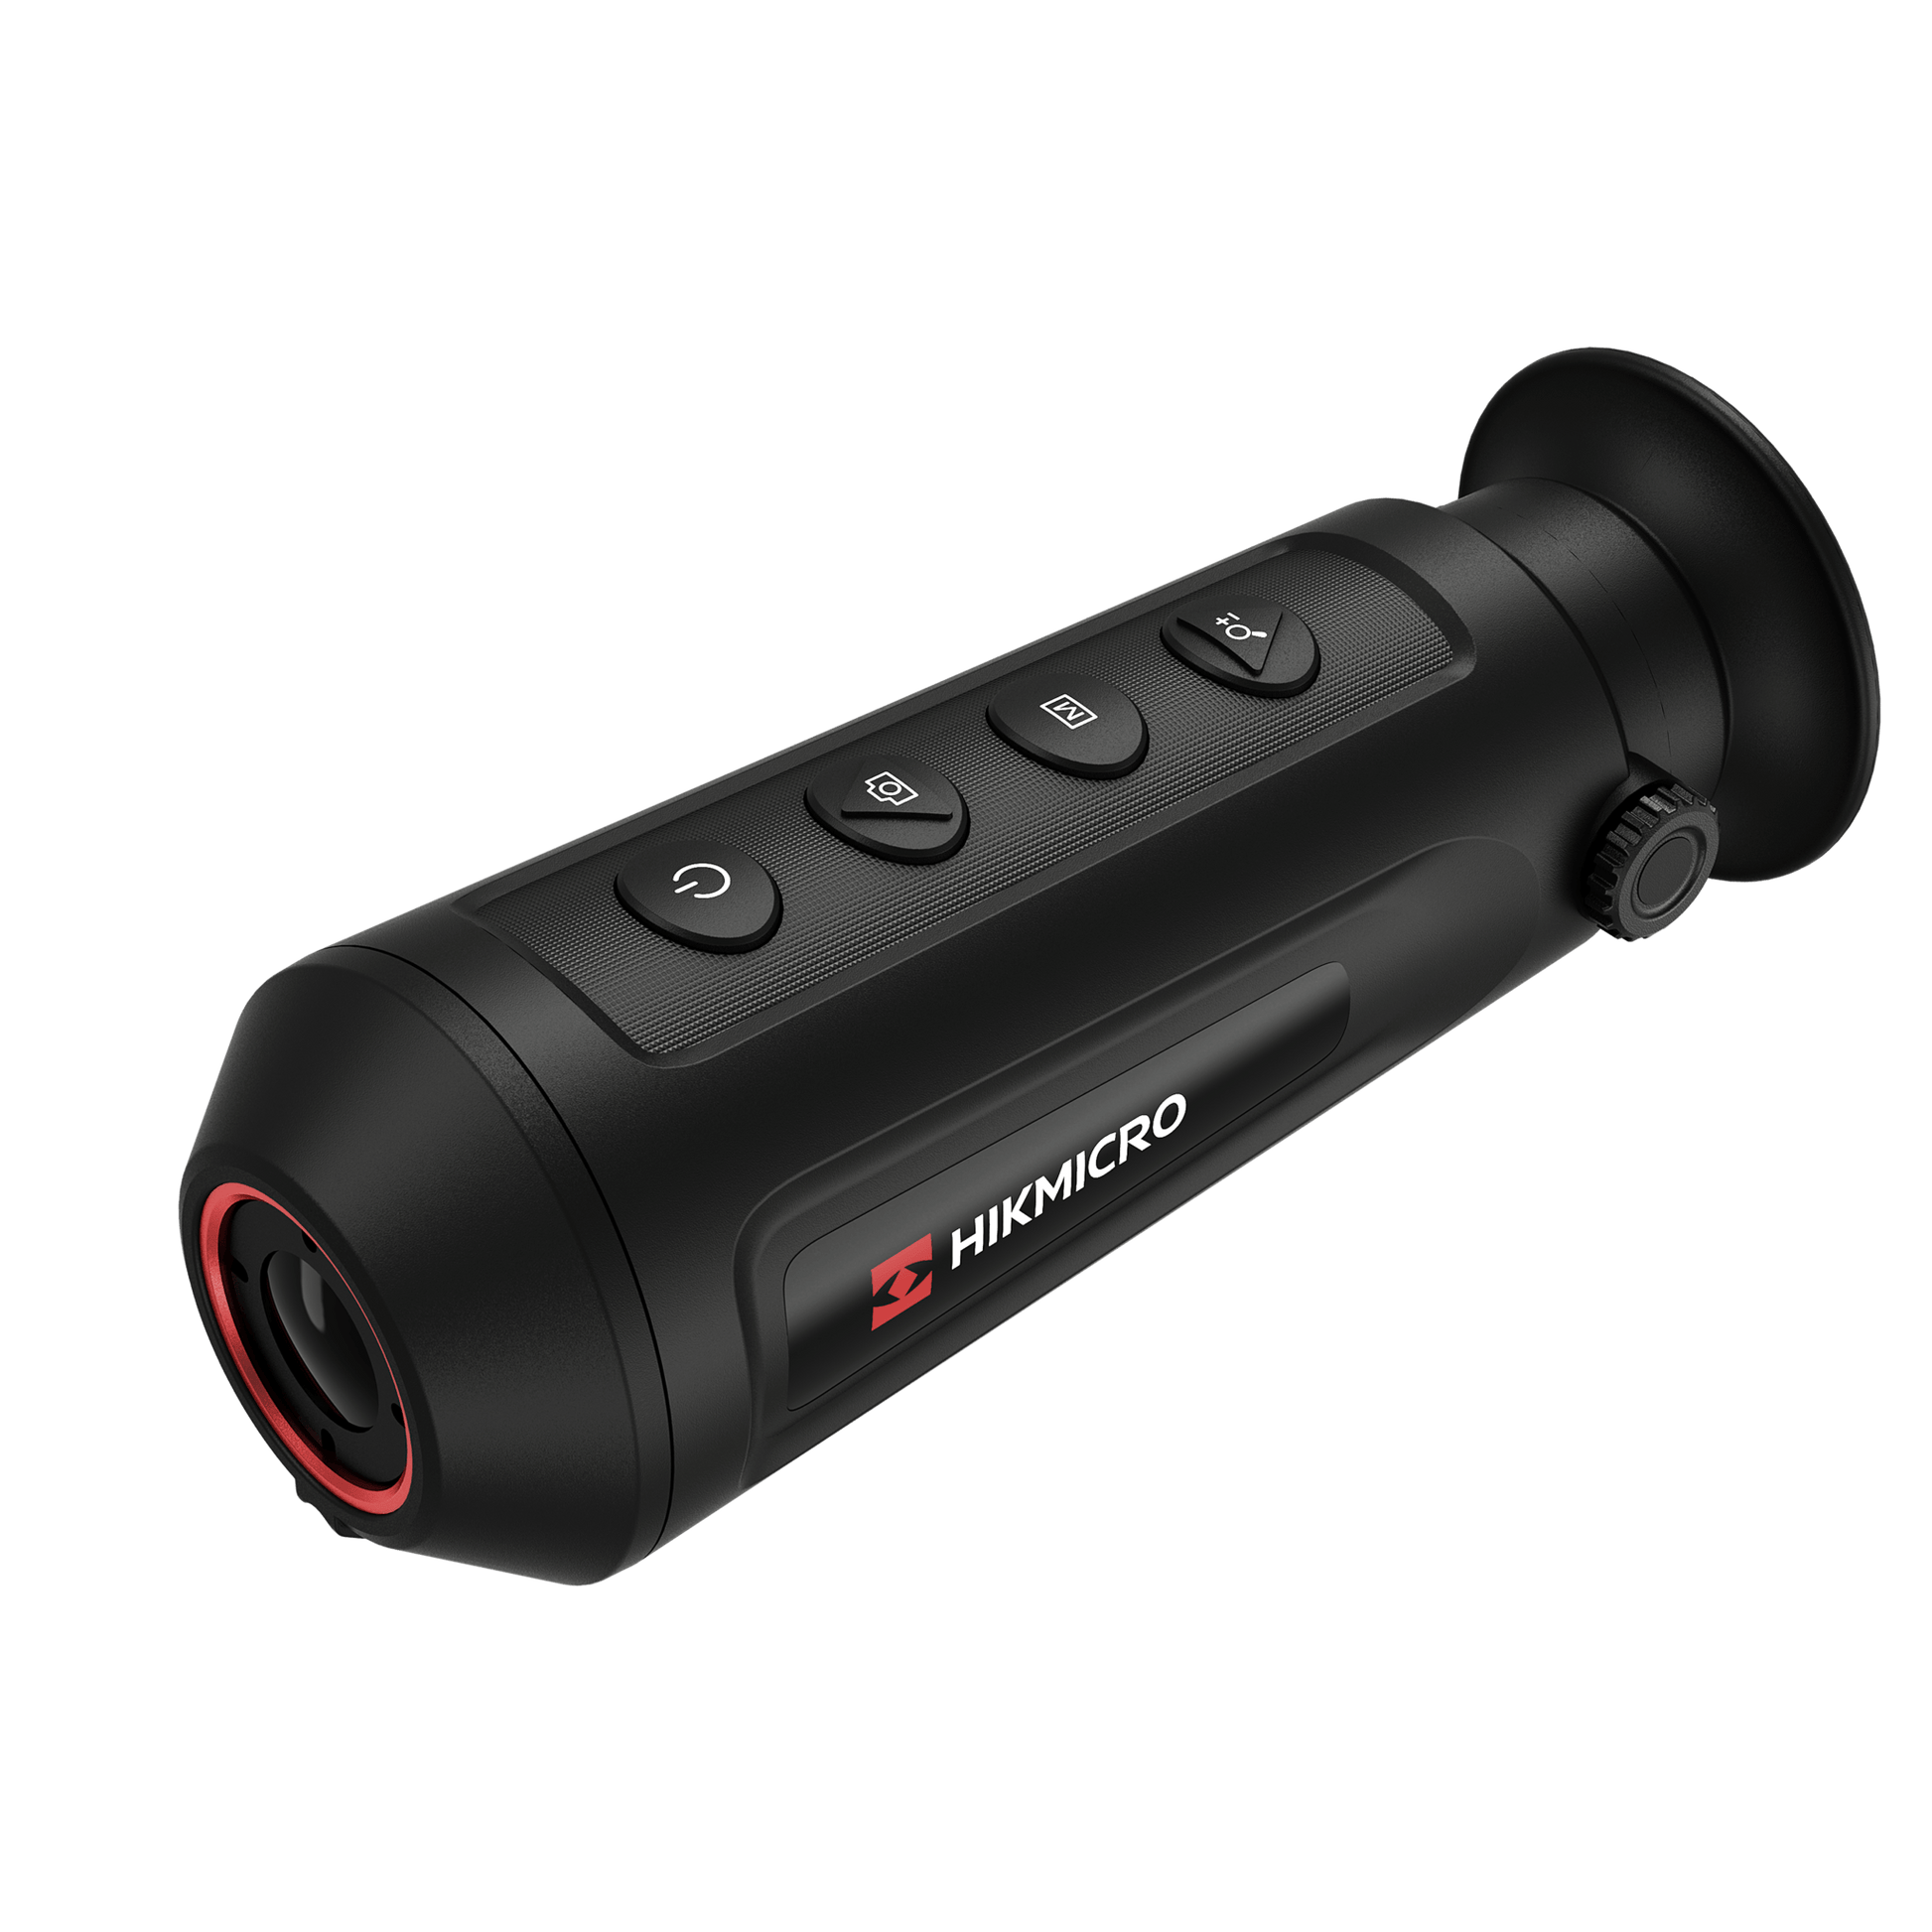 Cape Thermal - The best thermal imaging monoculars for sale - HikMicro LYNX Pro LH15 Handheld thermal imaging monocular - Left Side View